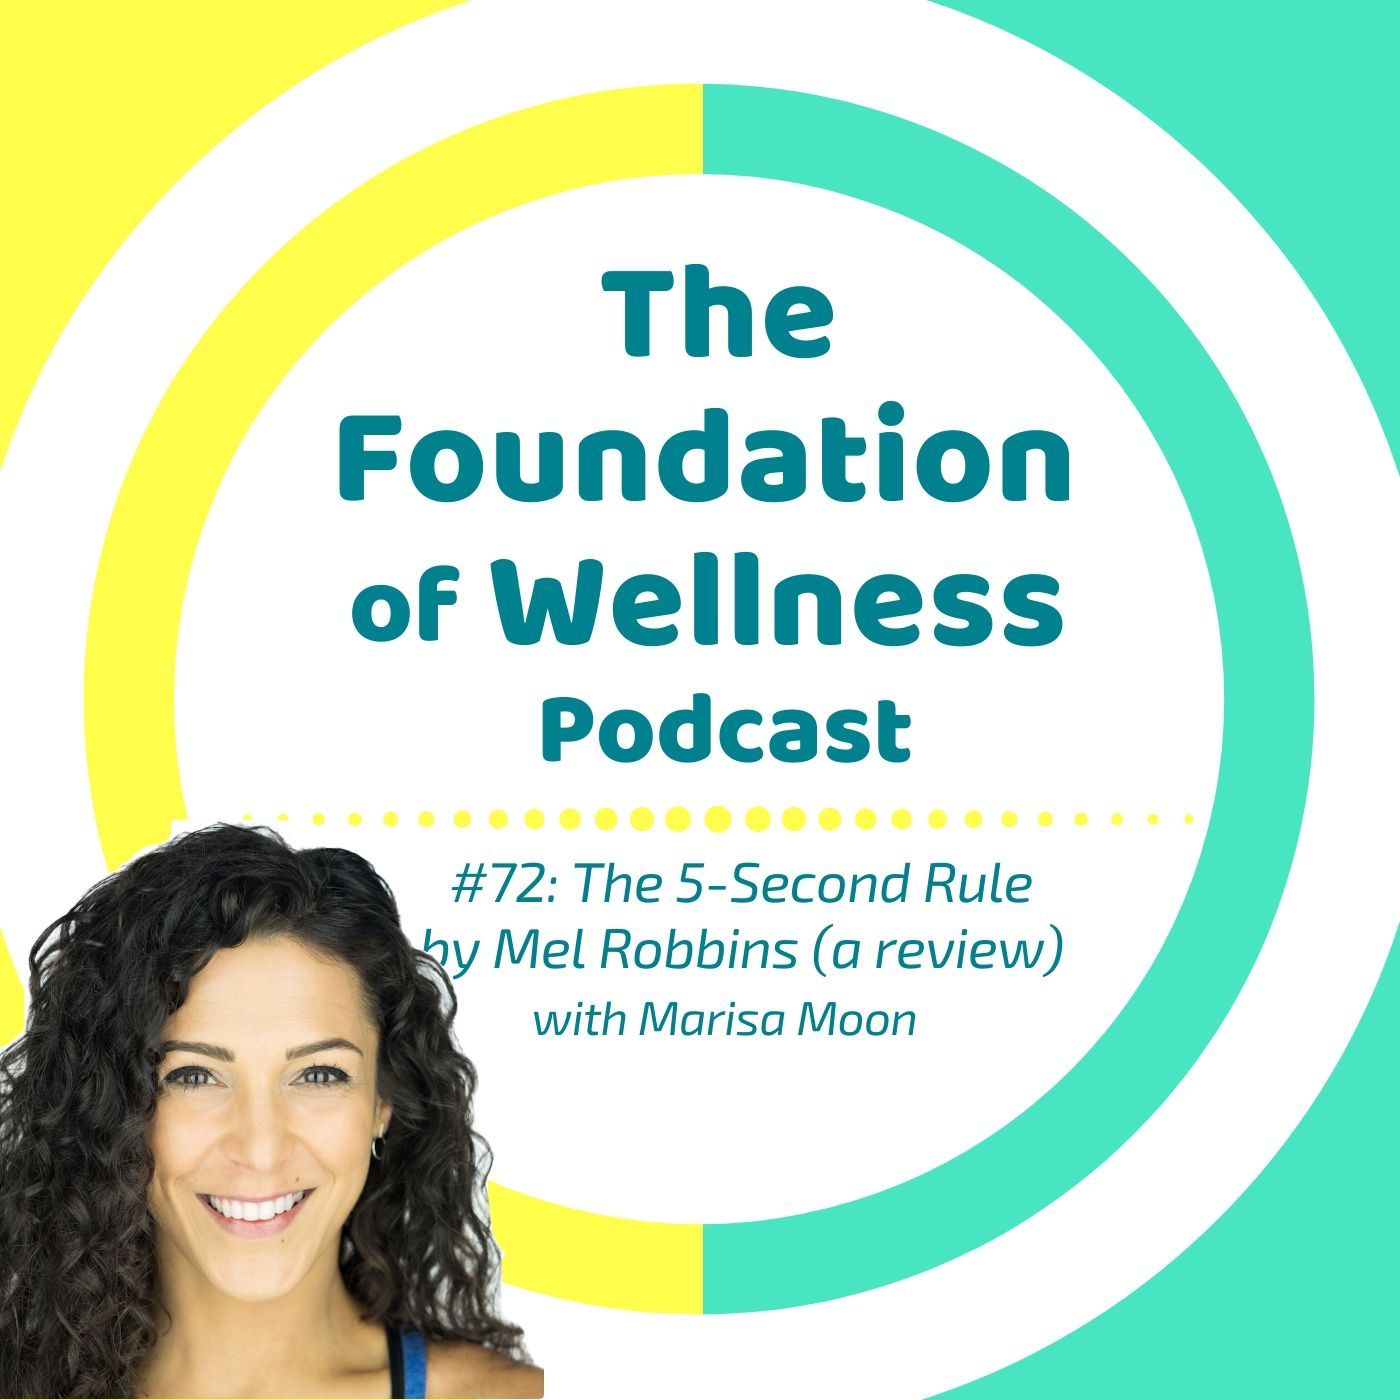 #72: How I Use the 5-Second Rule by Mel Robbins, Proven Strategy to Stop Overthinking with Marisa Moon